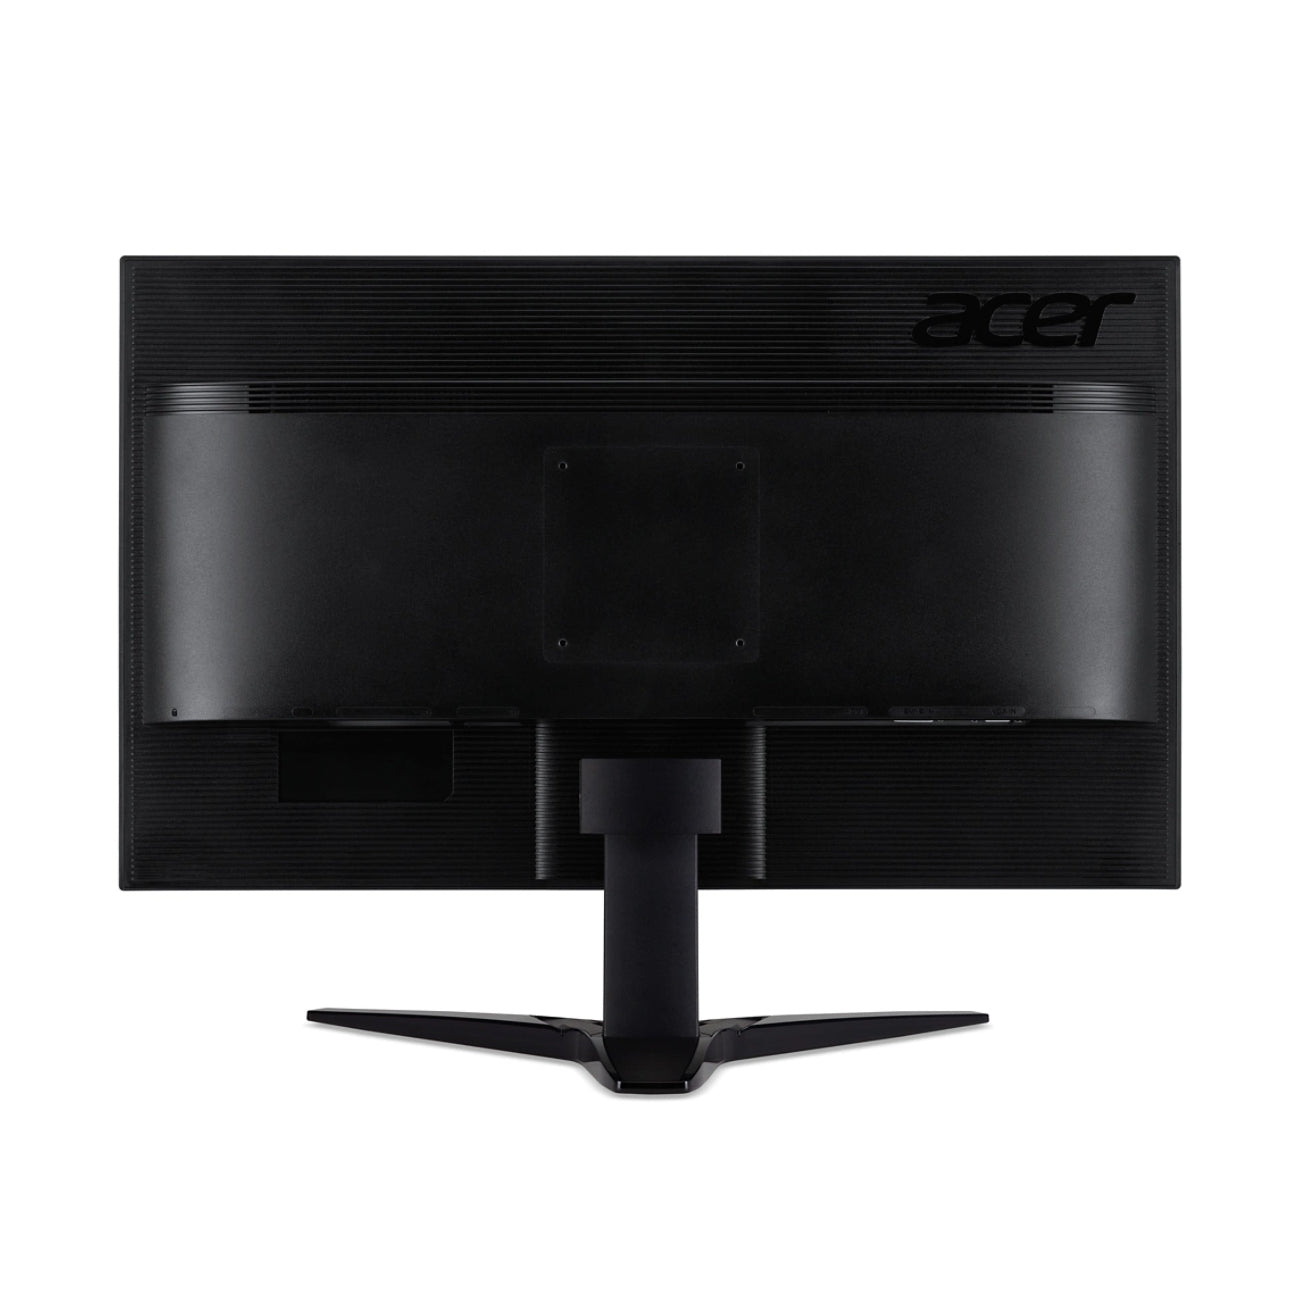 Acer Nitro KG251Q 25" Fhd 165hz 1ms Gaming Monitor (Brand New)